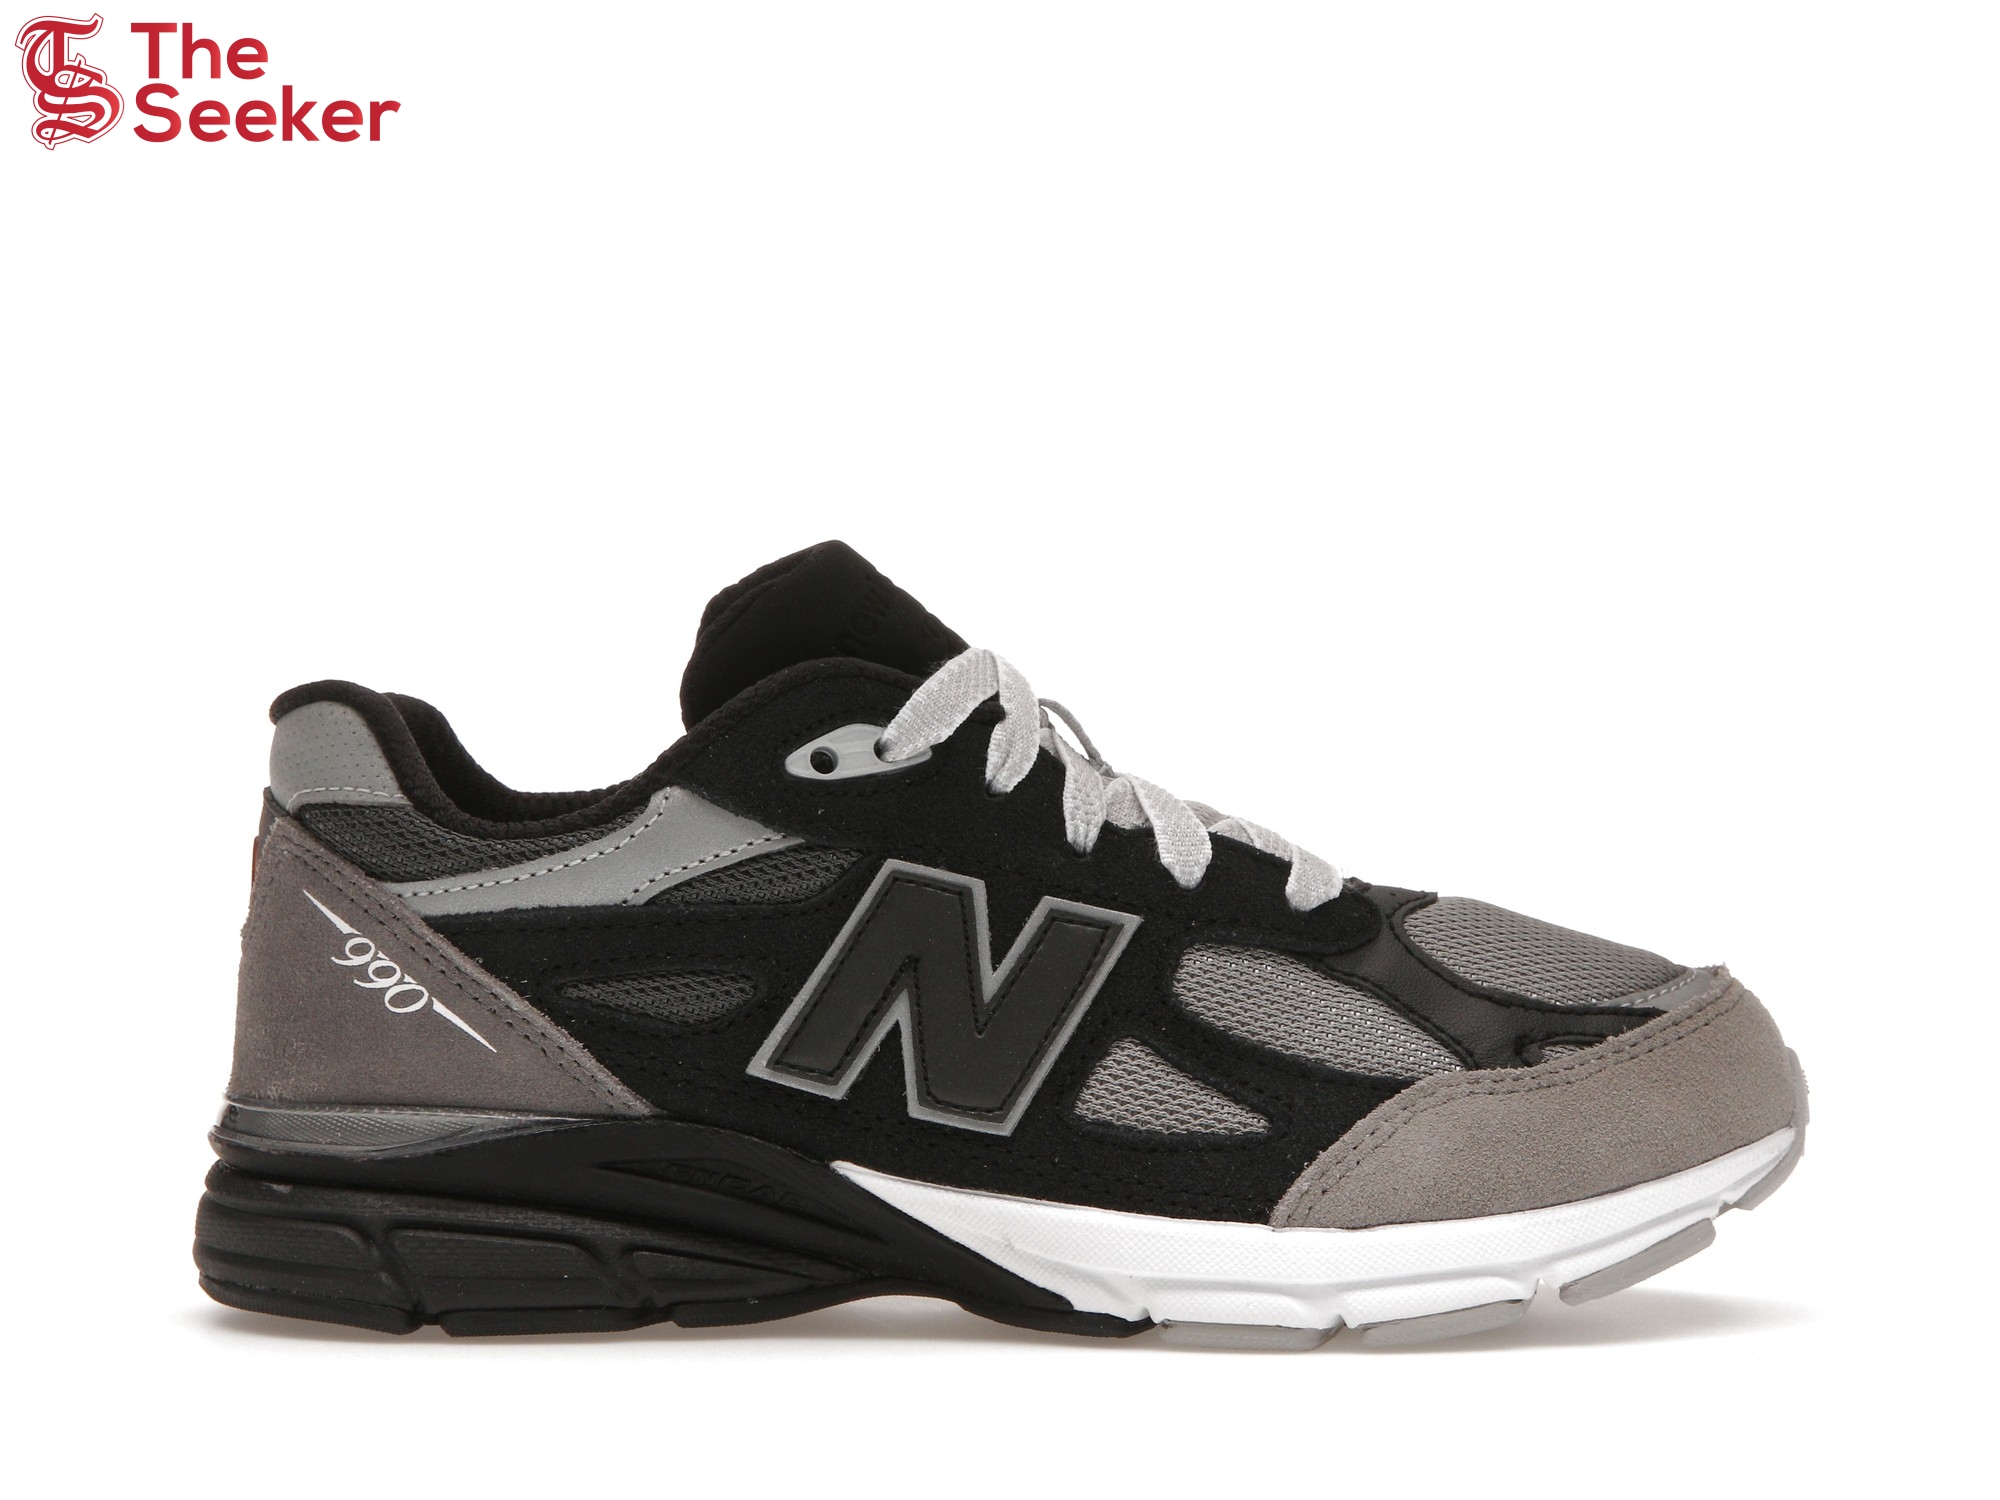 New Balance 990v3 MiUSA DTLR GR3YSCALE (GS)